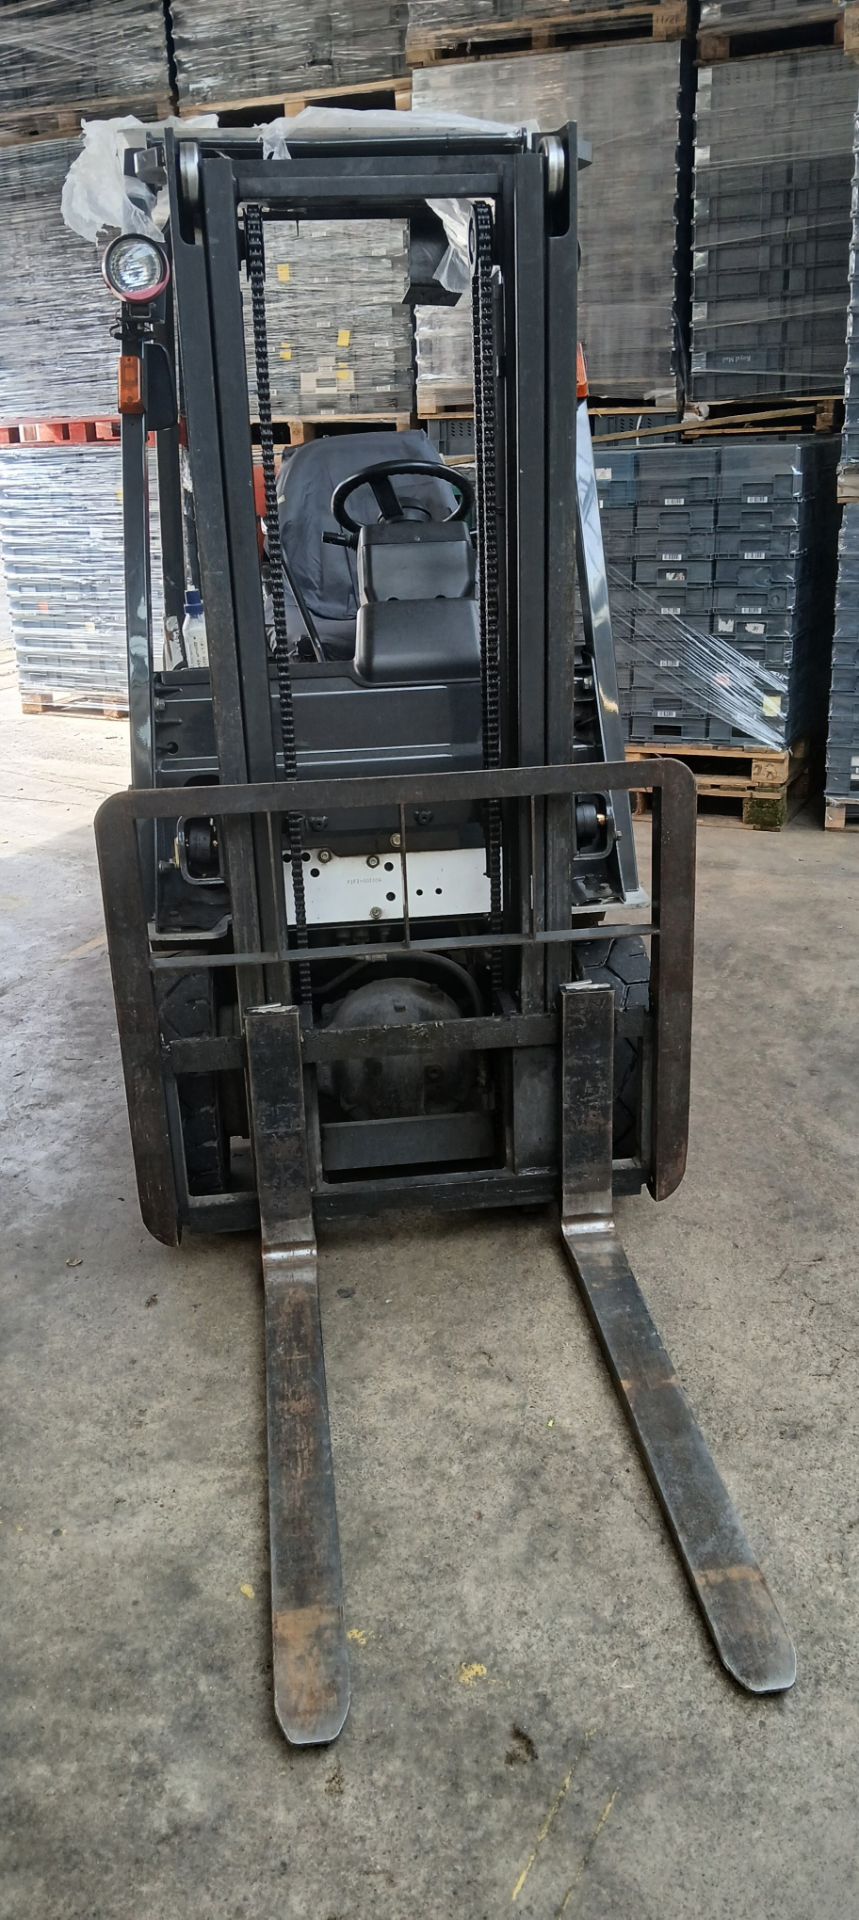 Nissan EBT P1F1 1,500kg capacity gas powered forklift truck, Serial Number P1F1-001804, Year 2009, - Image 2 of 5